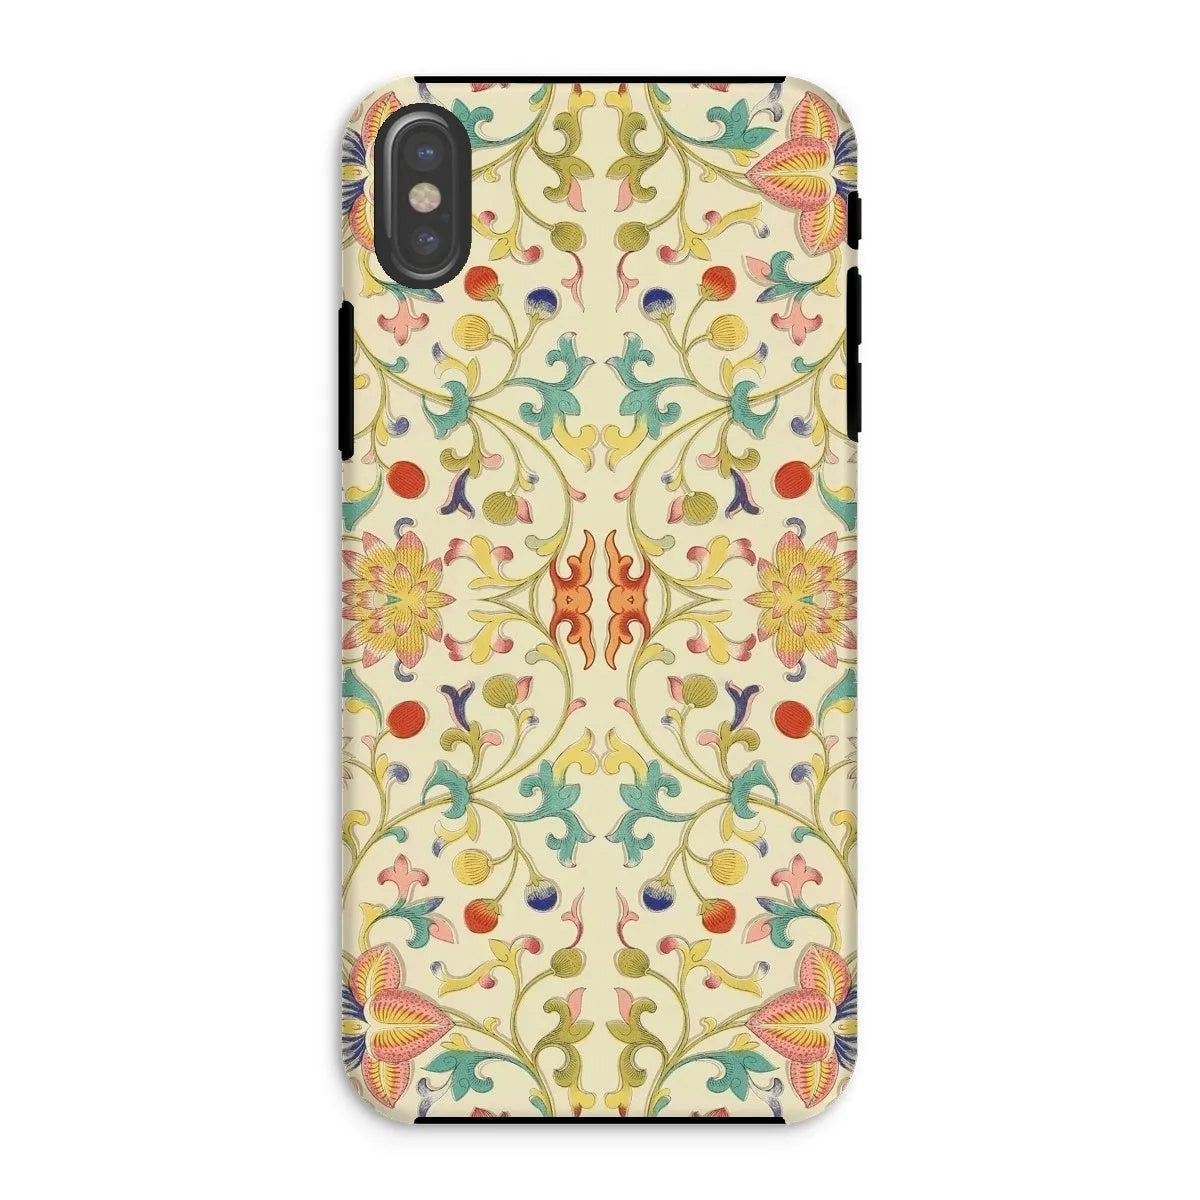 Over The Rainbow - Chinoiserie Pattern Art Phone Case - Iphone Xs / Matte - Mobile Phone Cases - Aesthetic Art